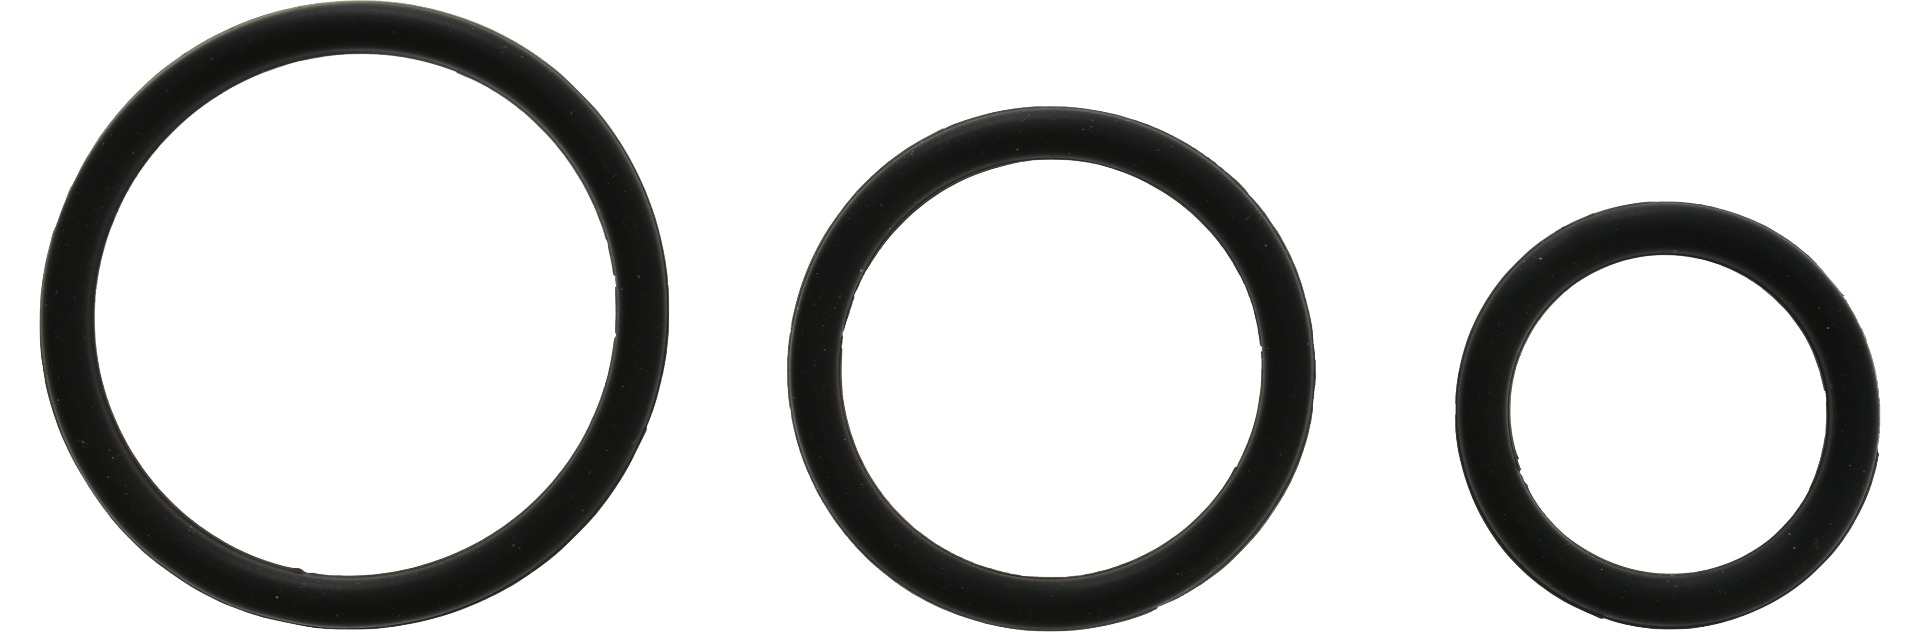 SET OF 3 ERECTION RINGS SILICONE BLACK PASSION LABS